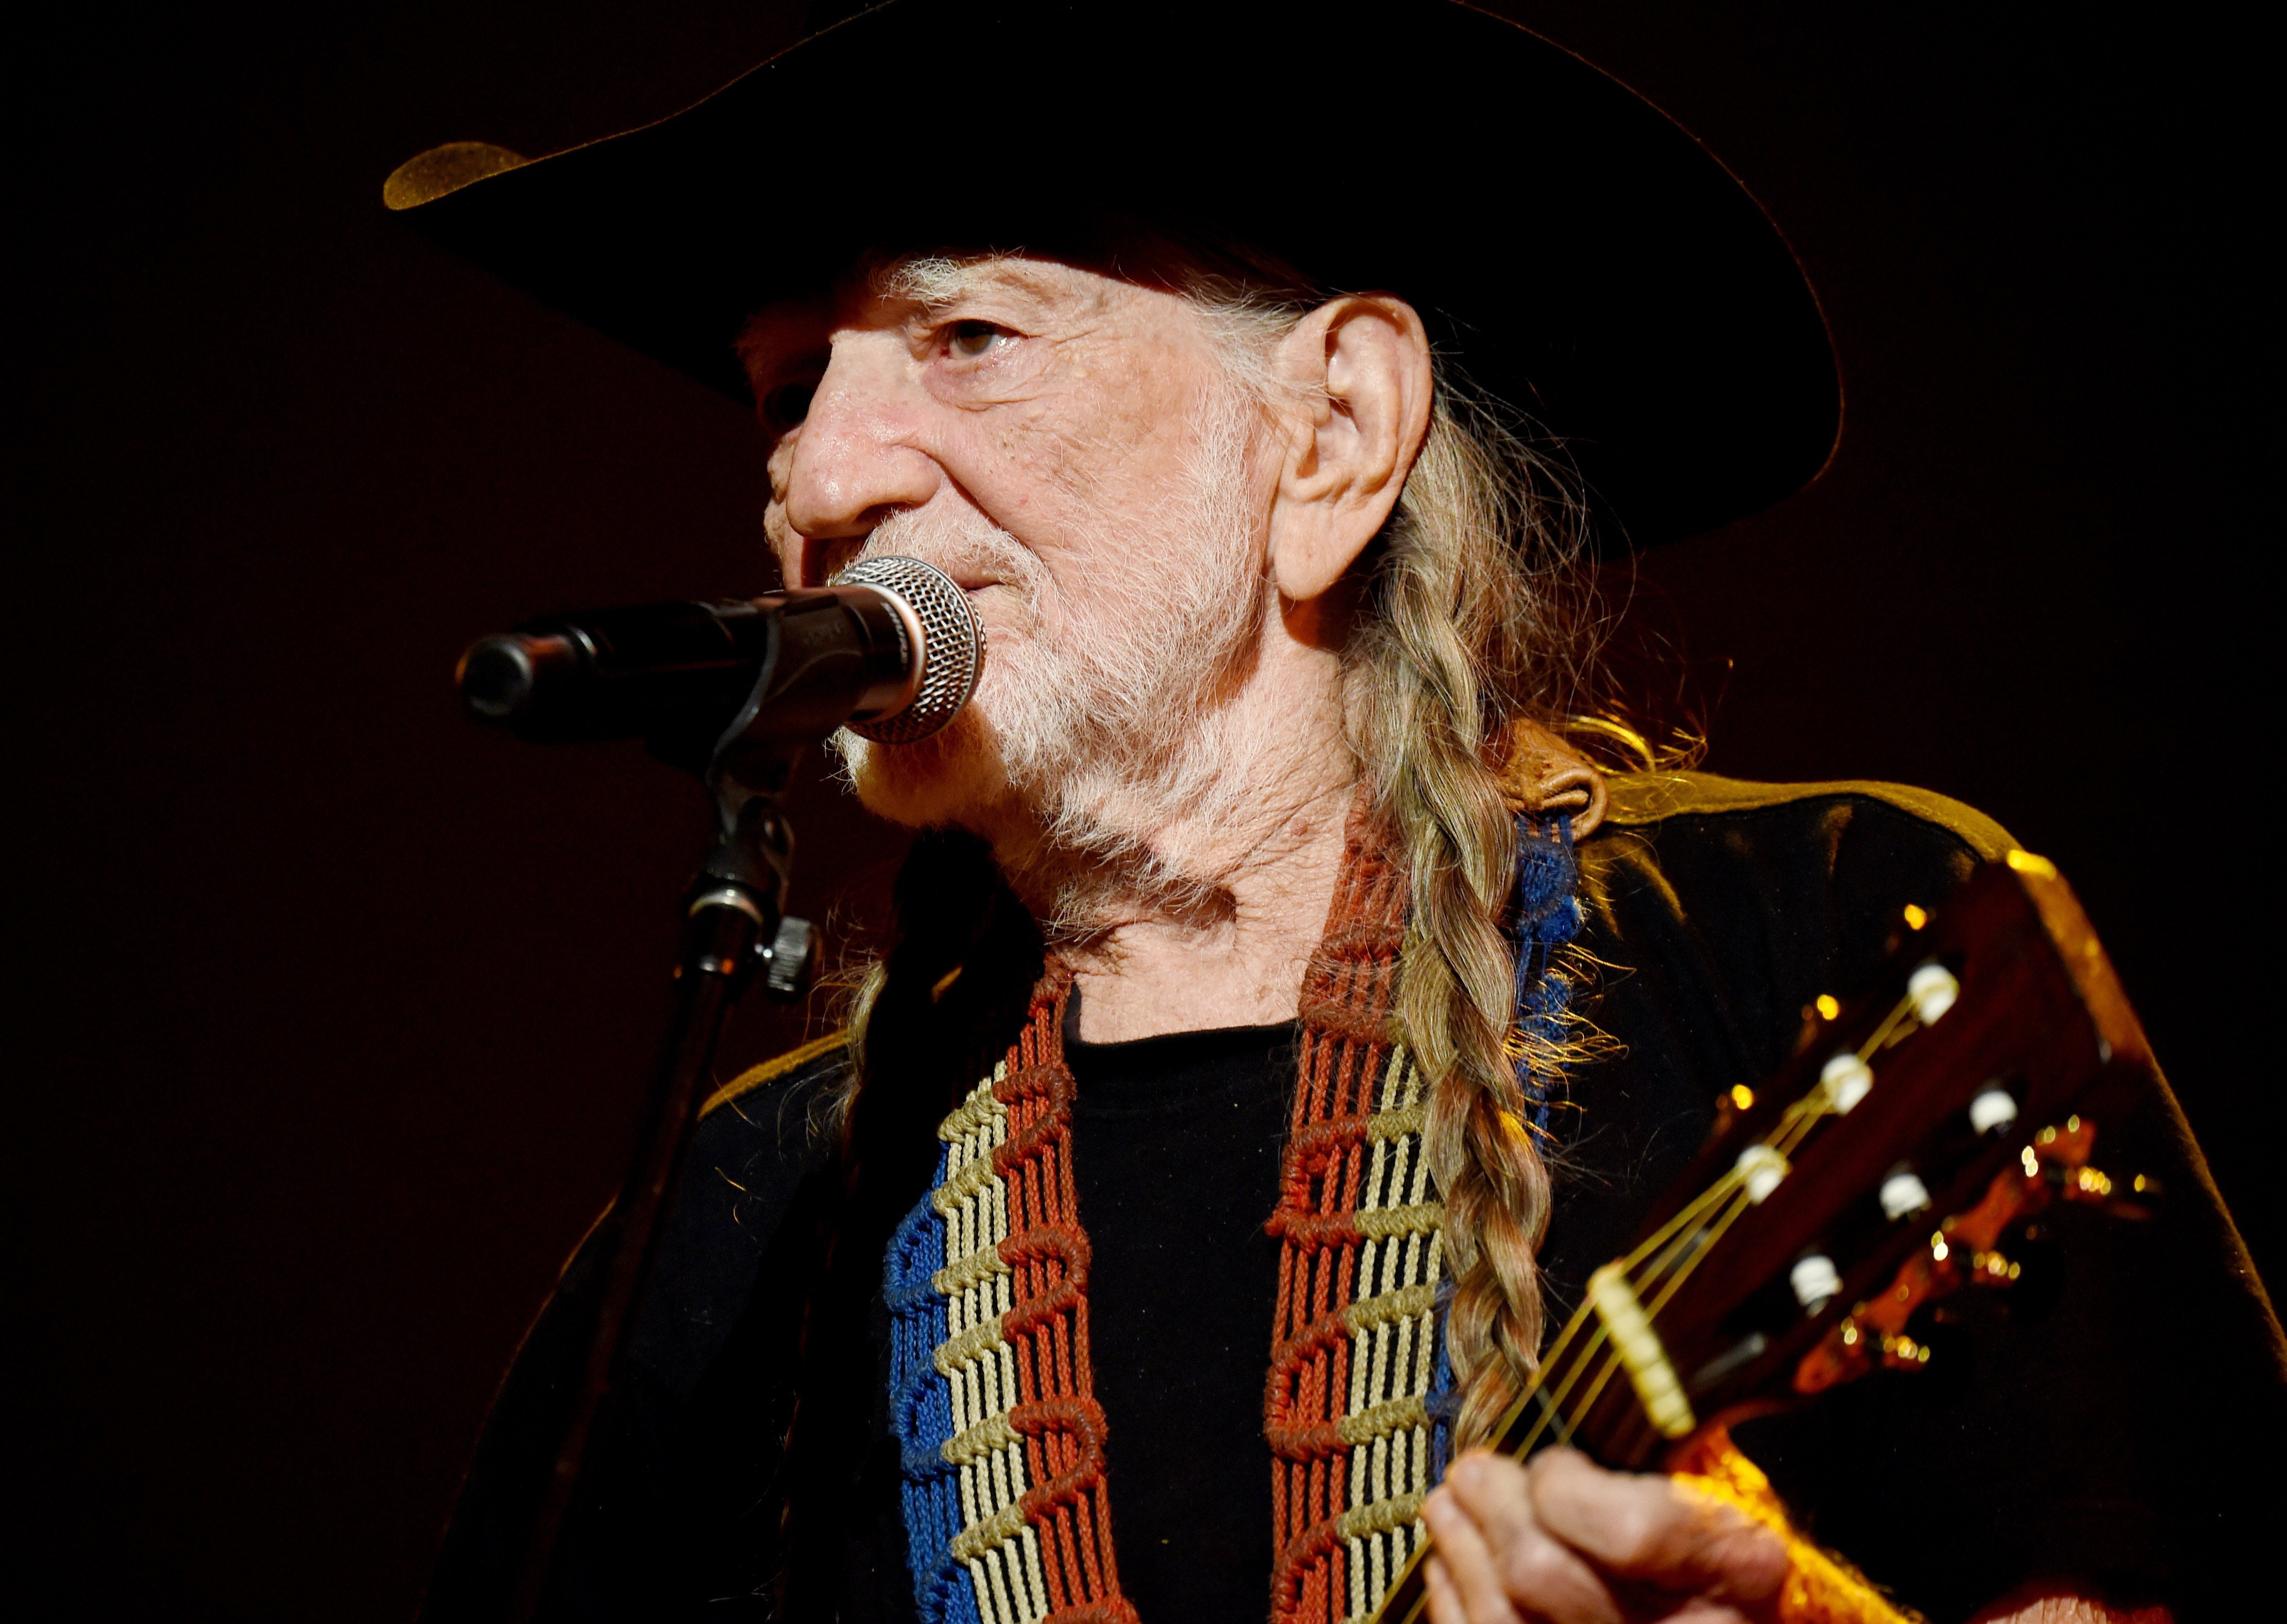 Willie Nelson, country singer | Photo: Getty Images